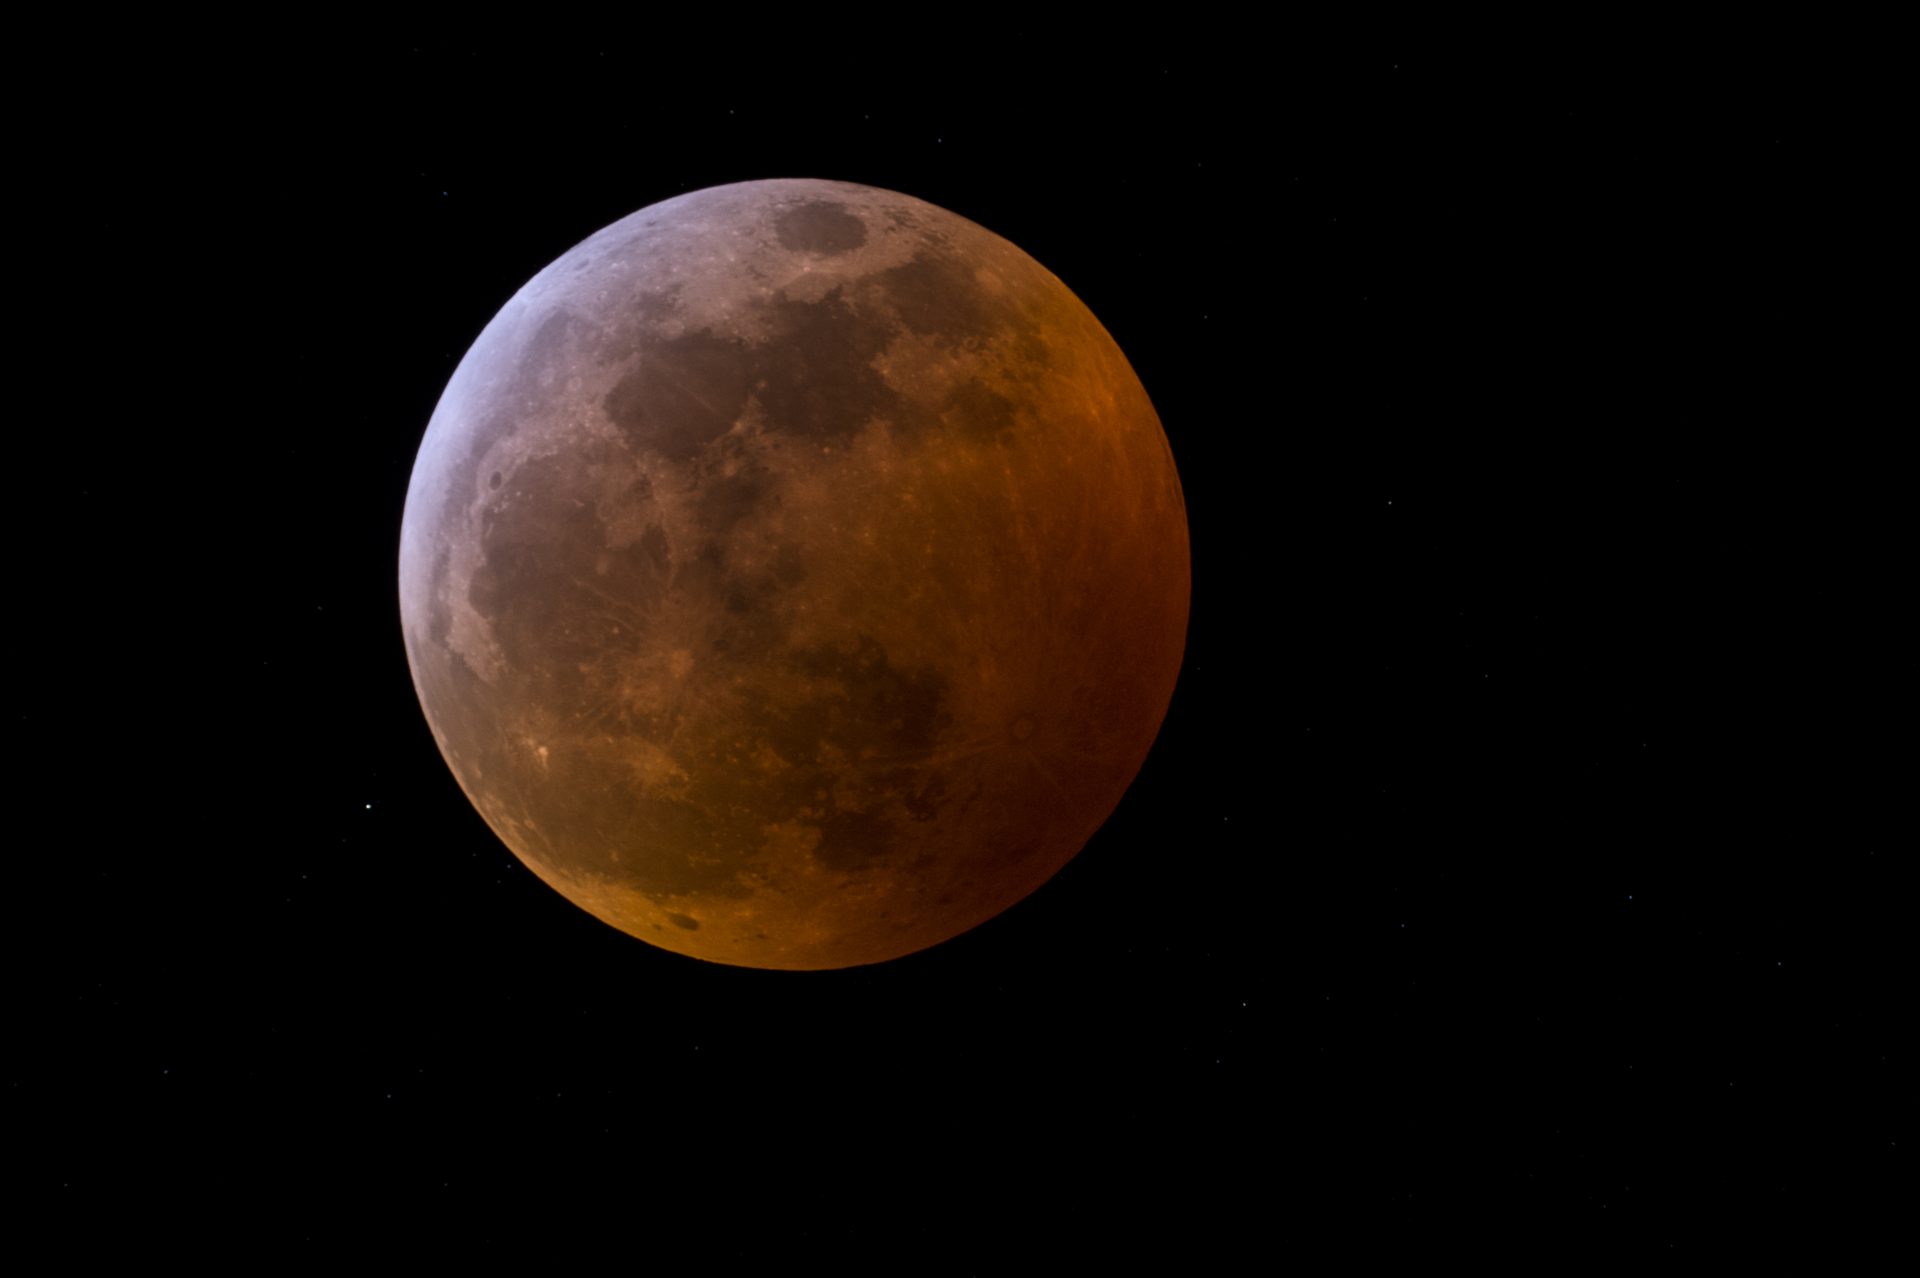 ‘Dapper Flower Blood Moon’ webcasts: How that you just can maybe seek the supermoon eclipse of 2021 on-line